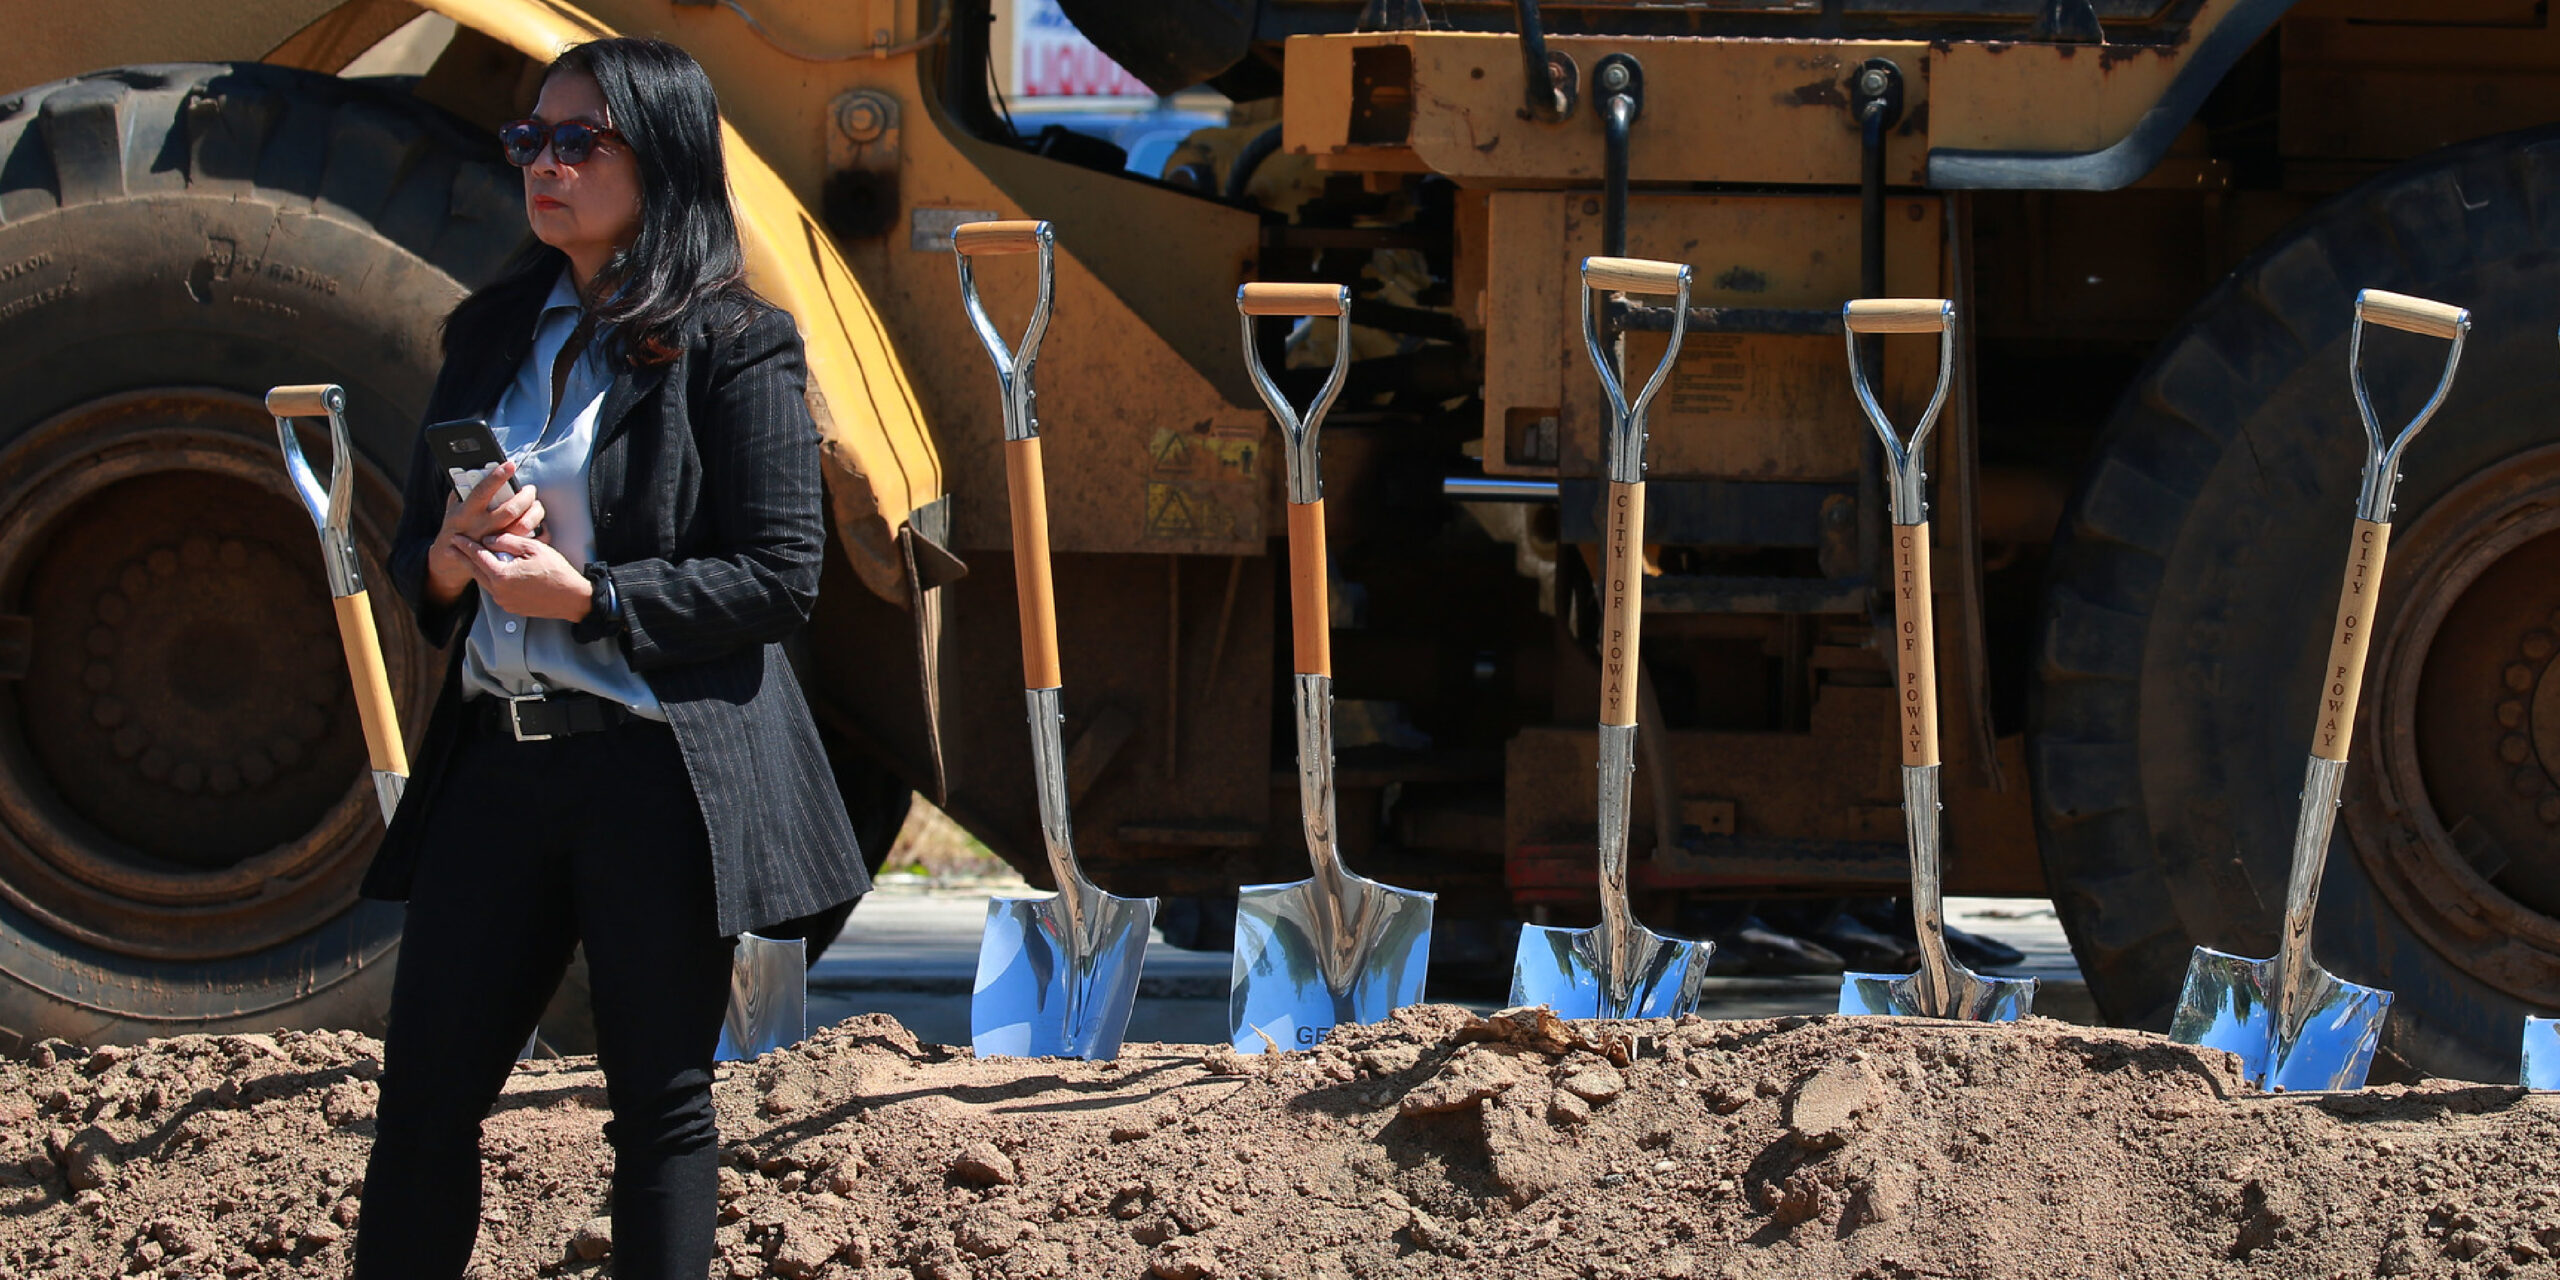 Amelita wearing a suit and sunglasses, standing outside in front of a small hill of dirt, with blue shovels lined up